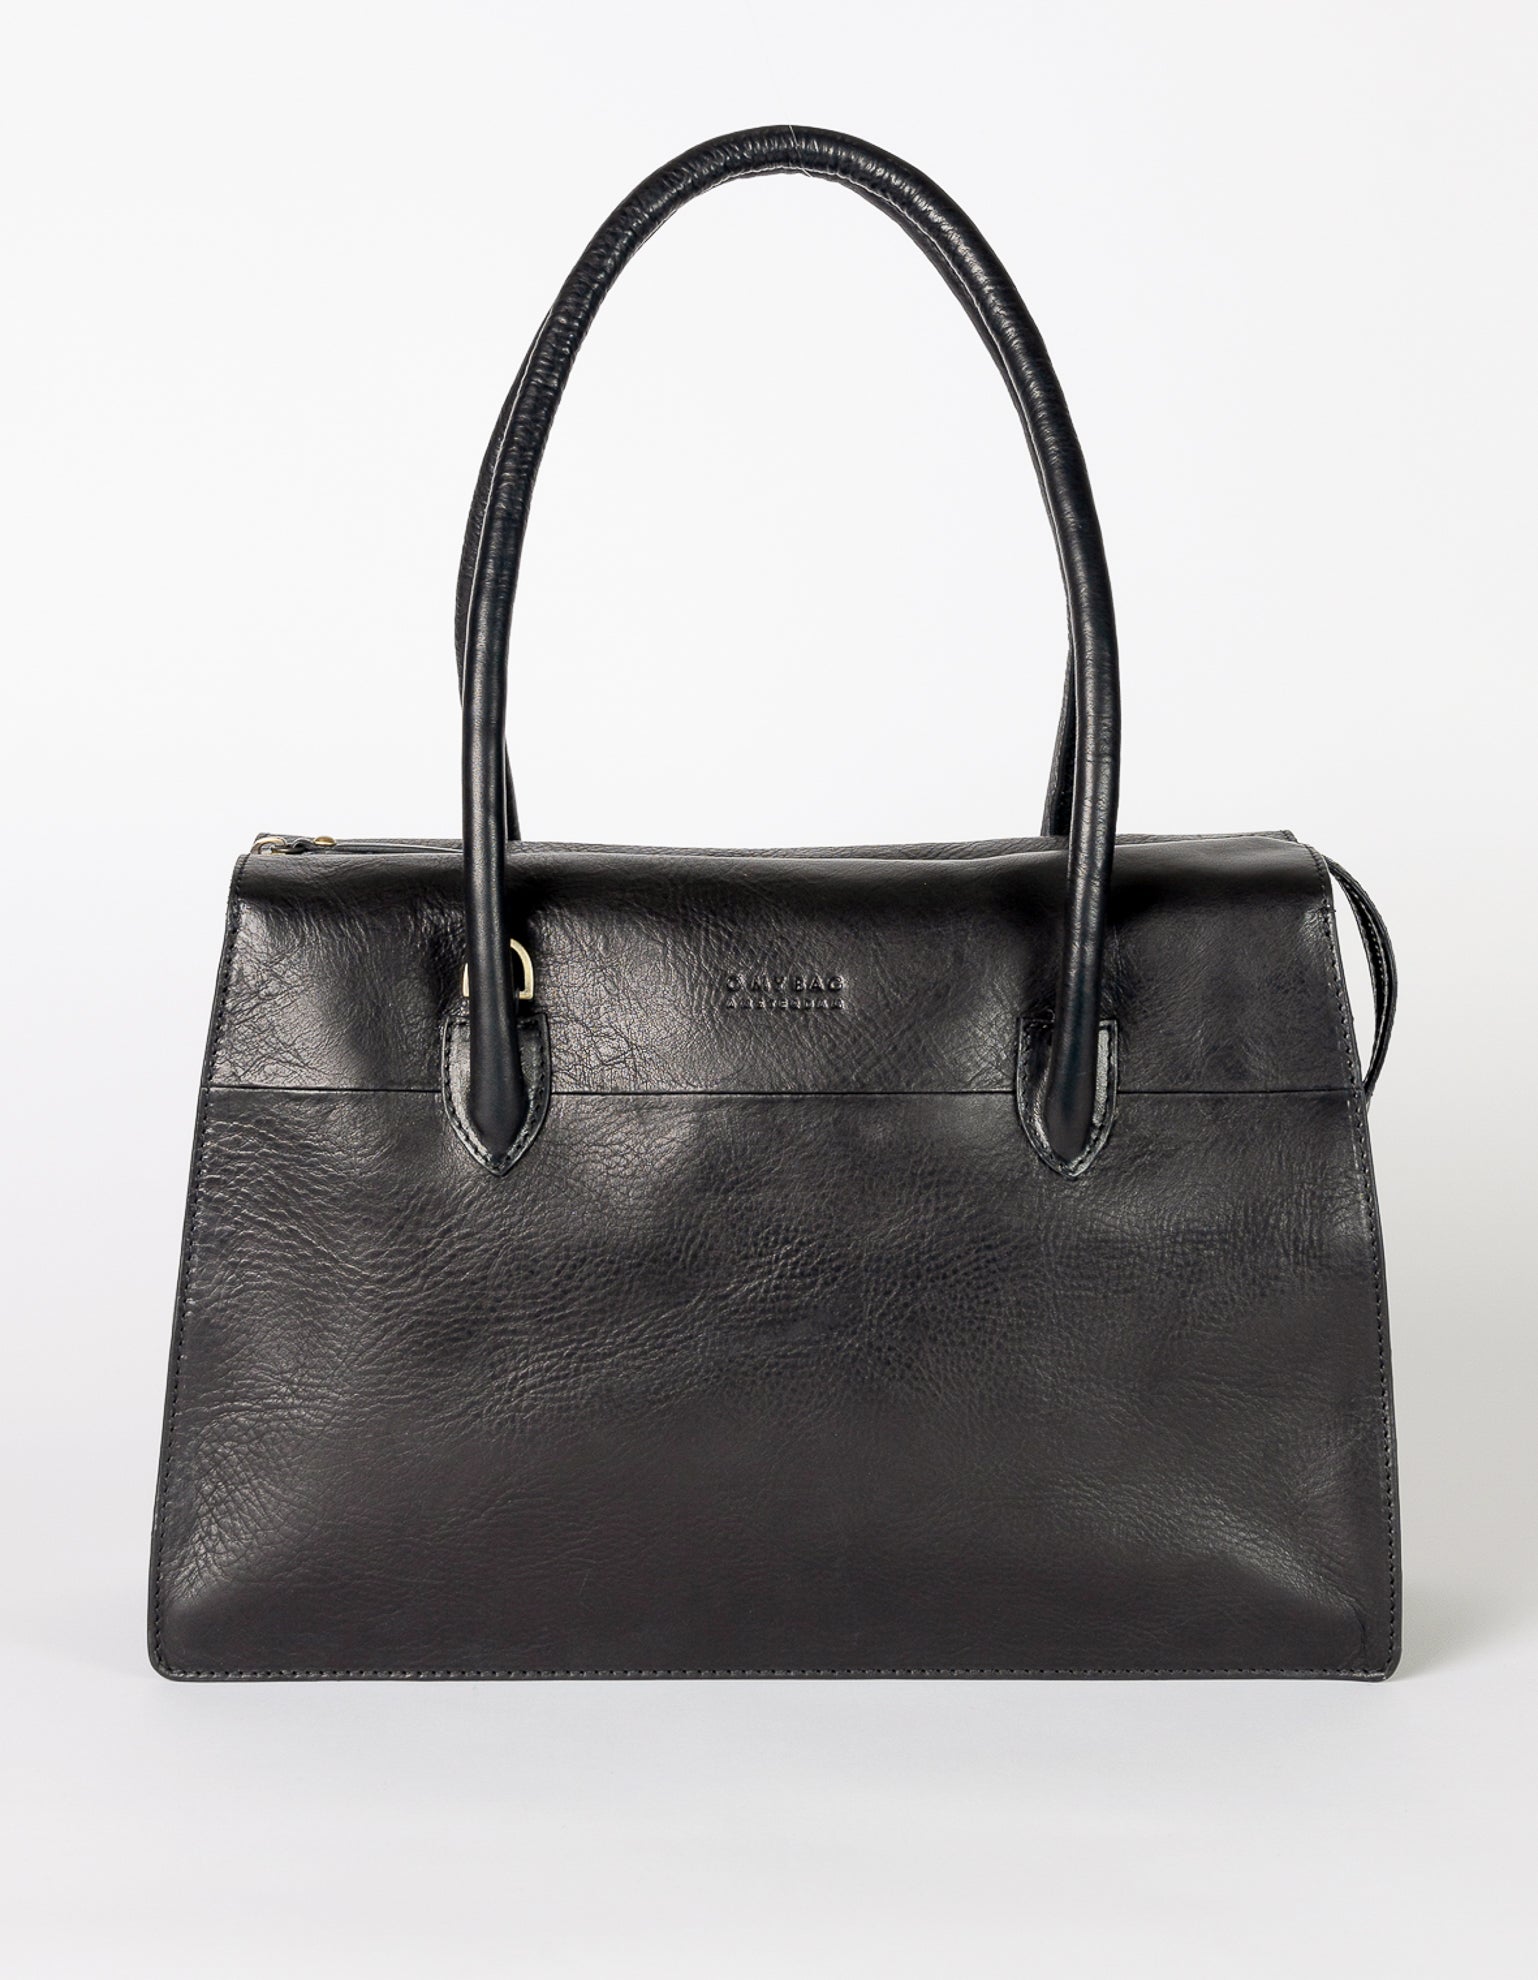 Kate Black Stromboli Leather Crossbody Shoulder Bag with Large Straps by O My Bag. Front Product Image